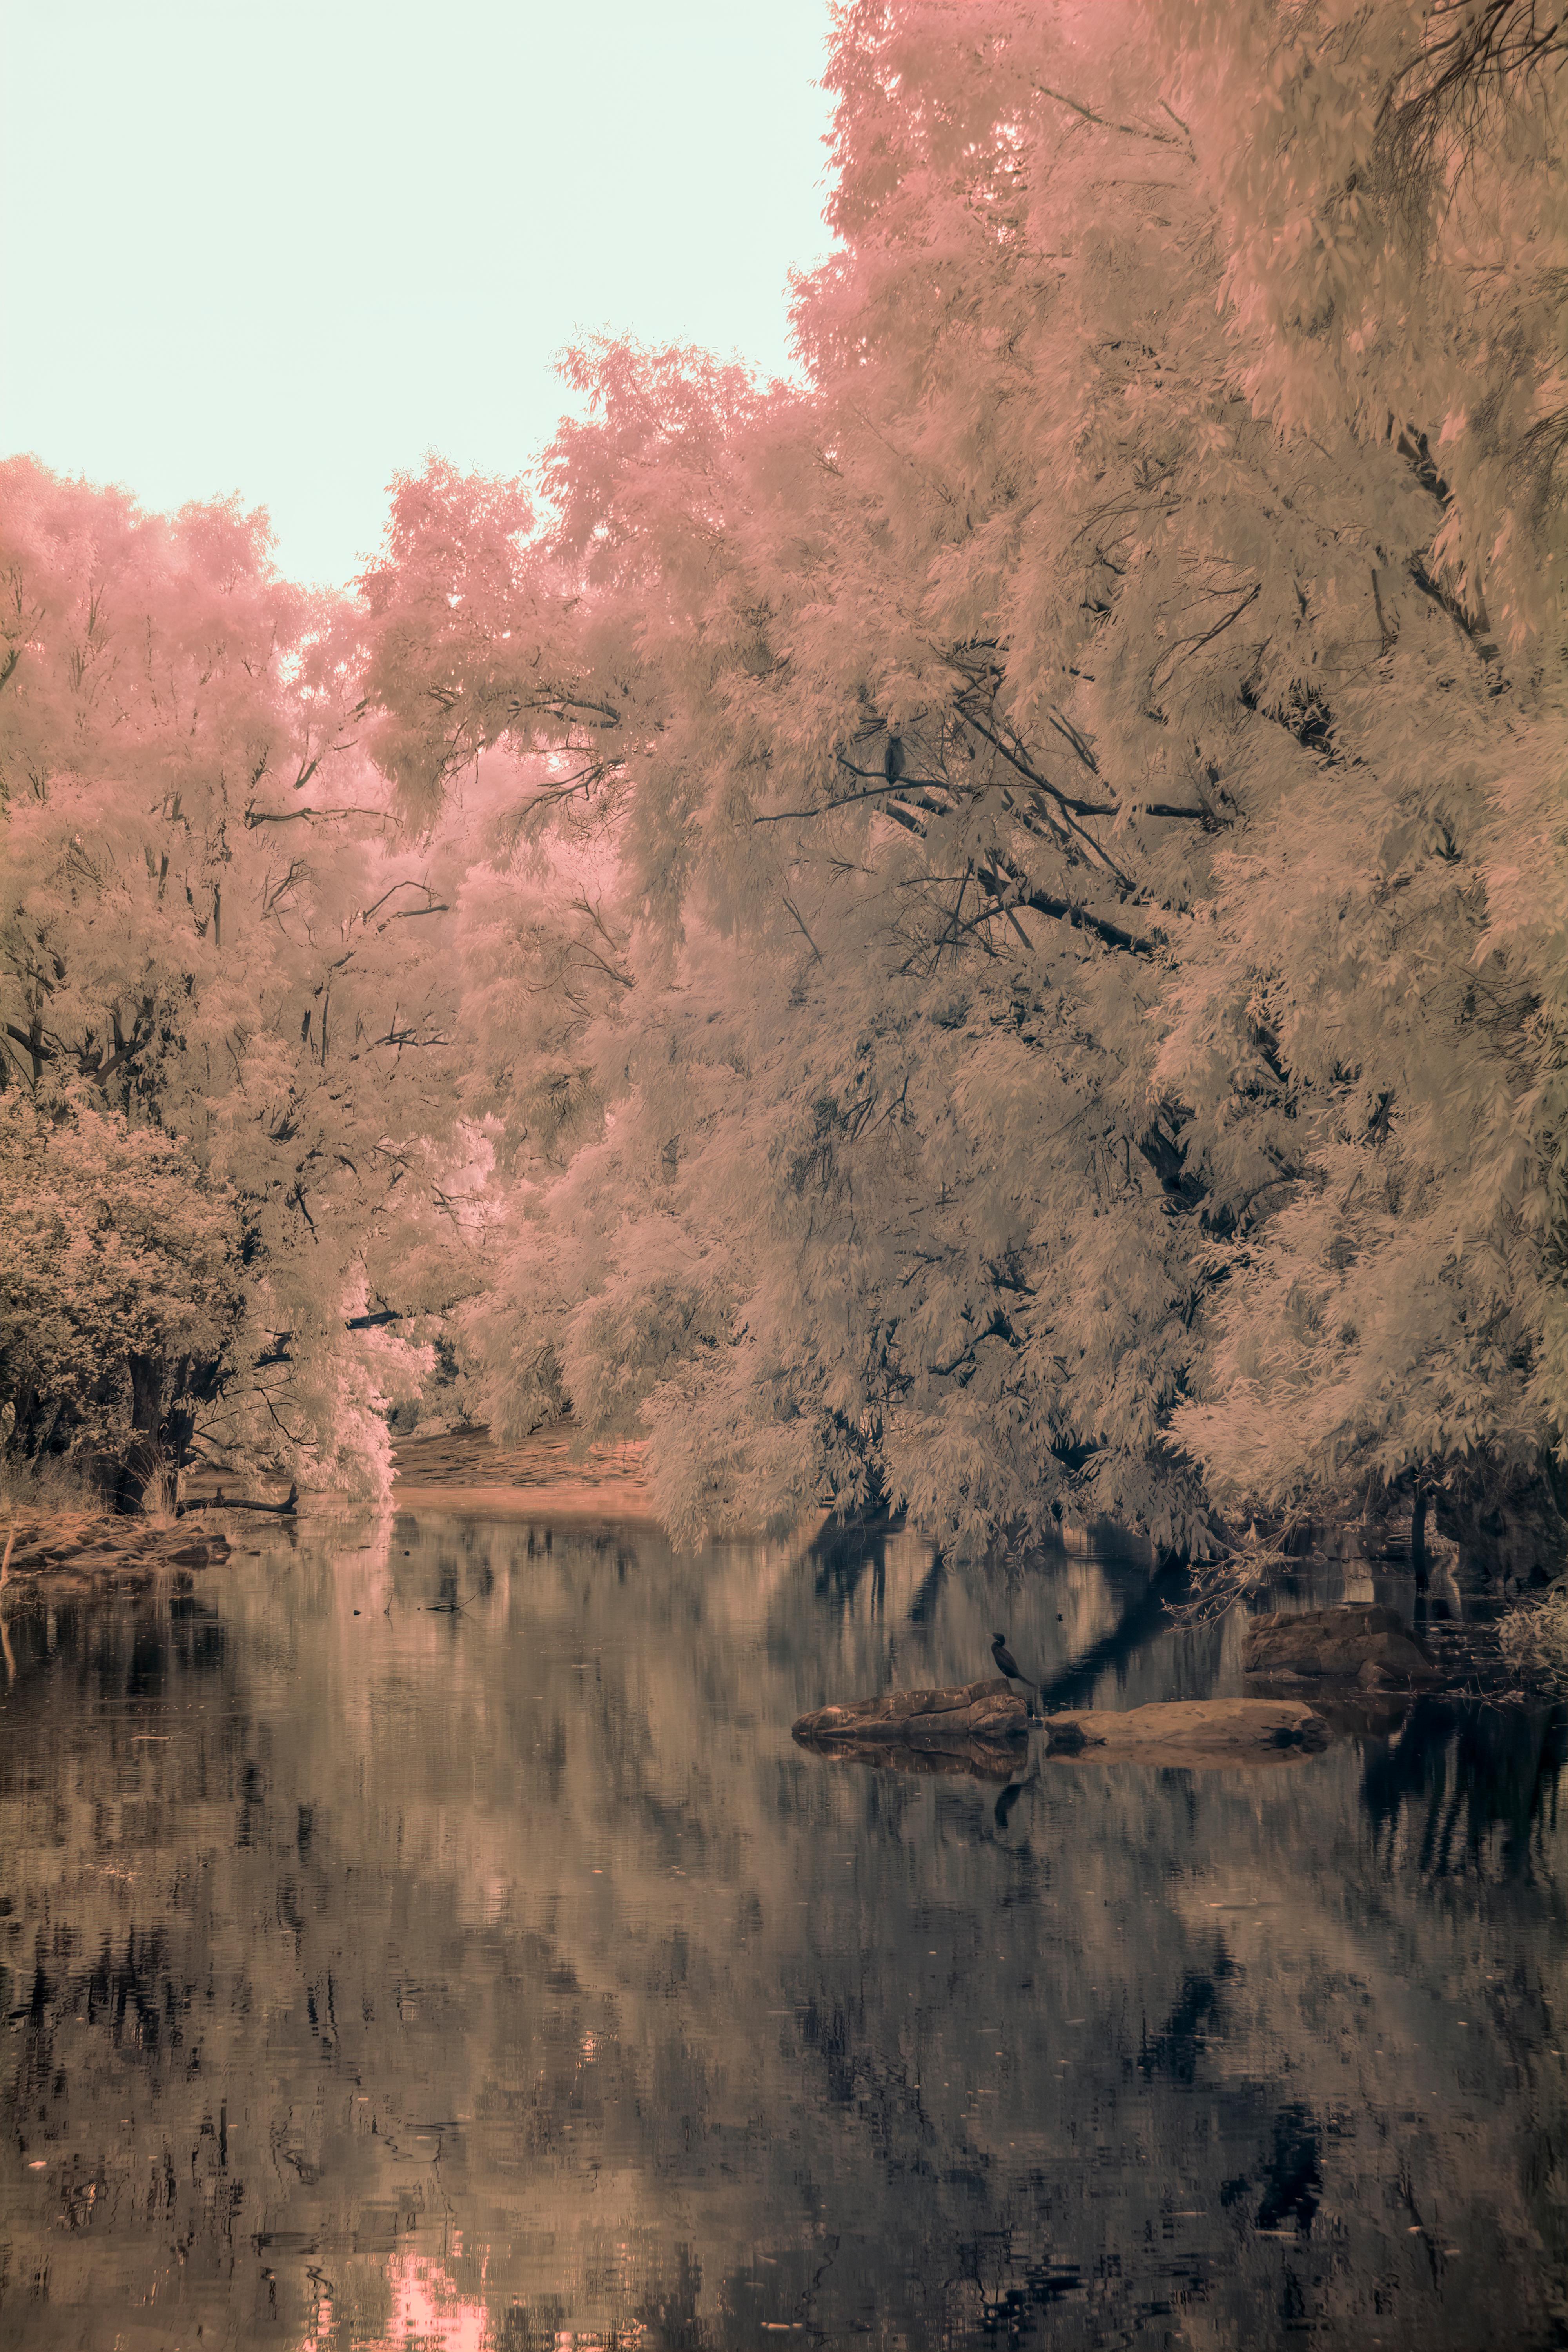 Aditya Dicky Singh Color Photograph - Large Landscape Ethereal Nature Wildlife Photograph India Pond Trees Peach Blue